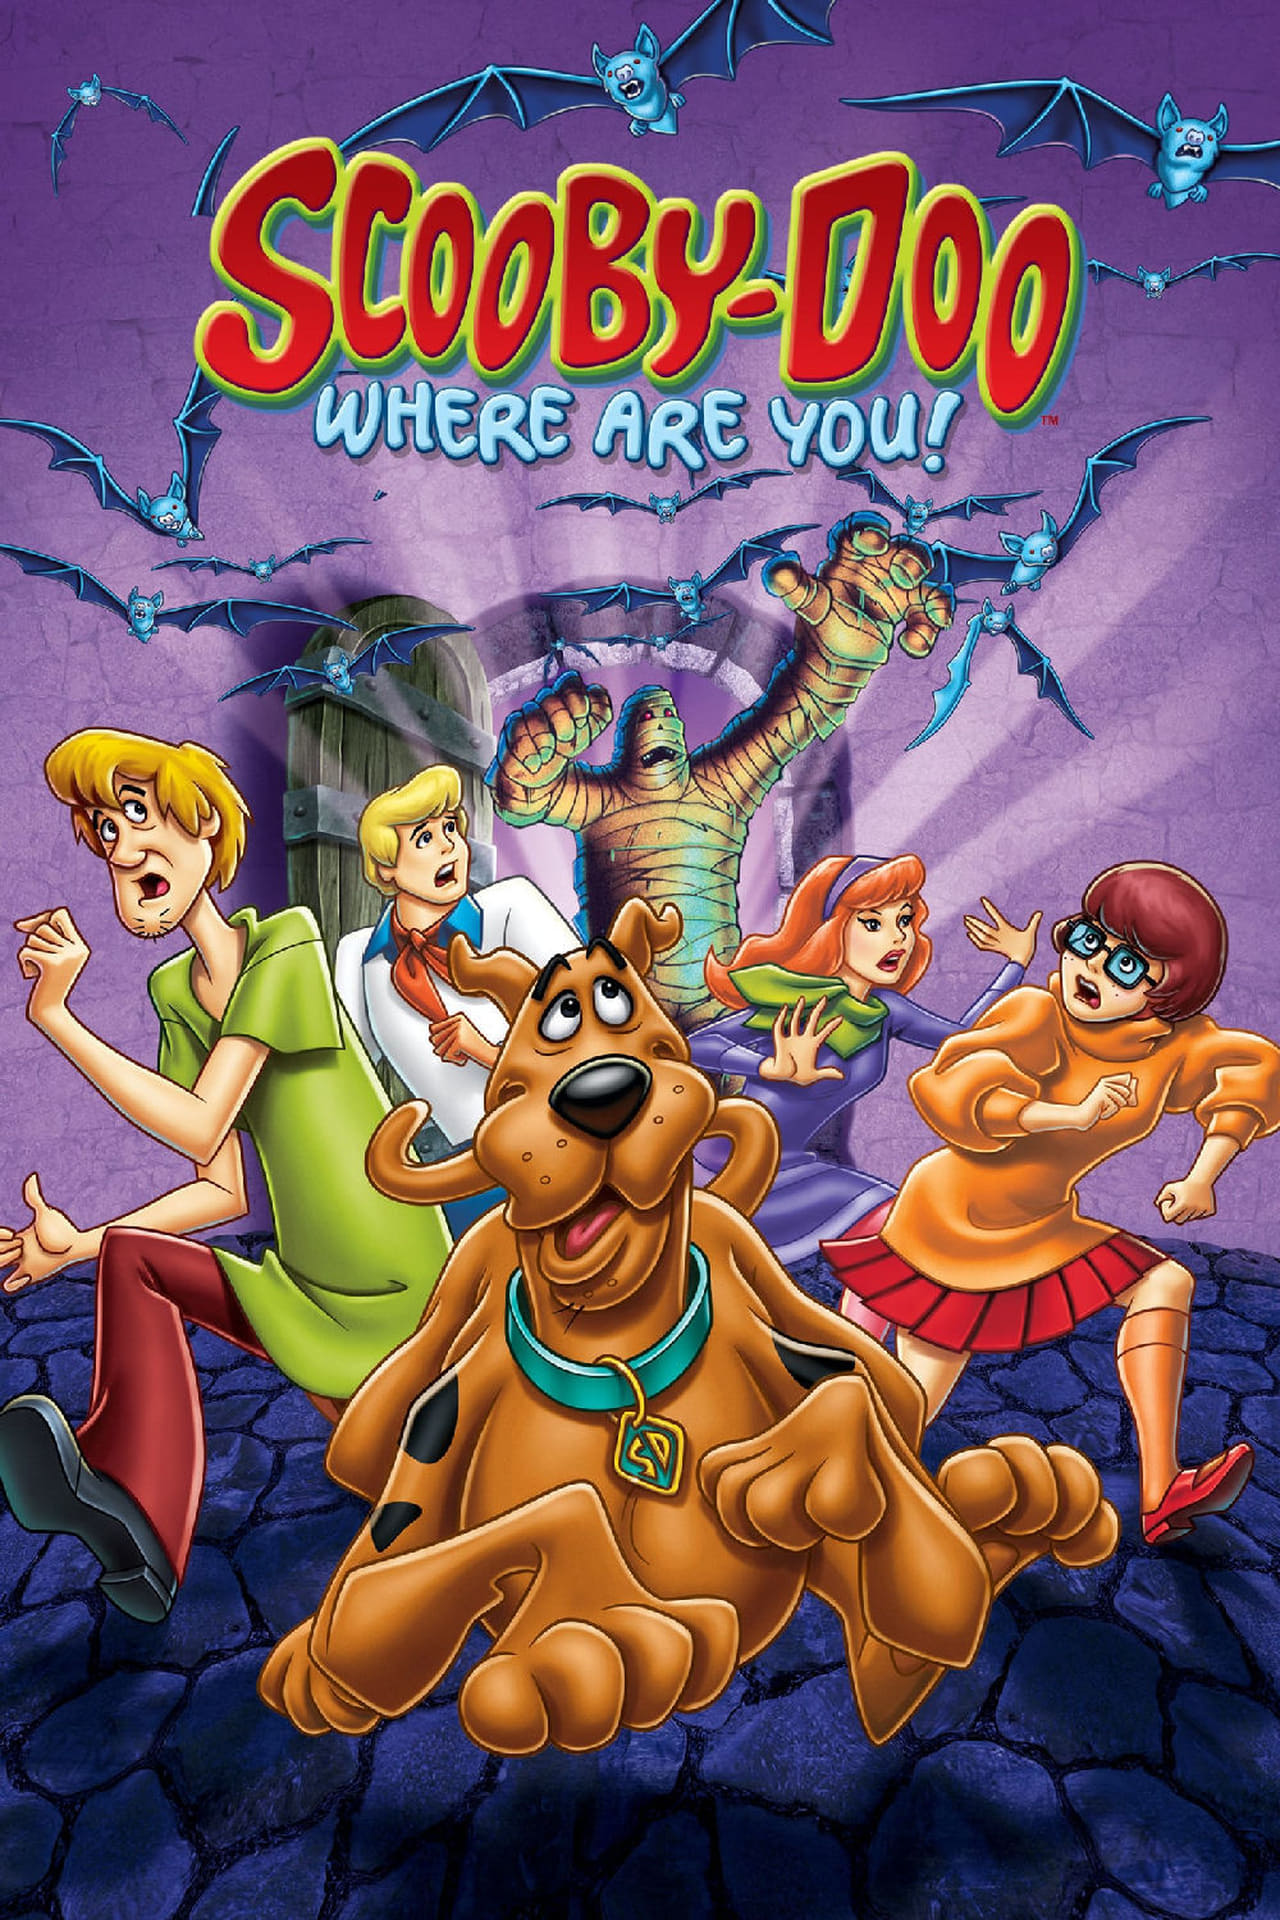  Scooby  Doo  Where Are You Season 1  wiki synopsis 